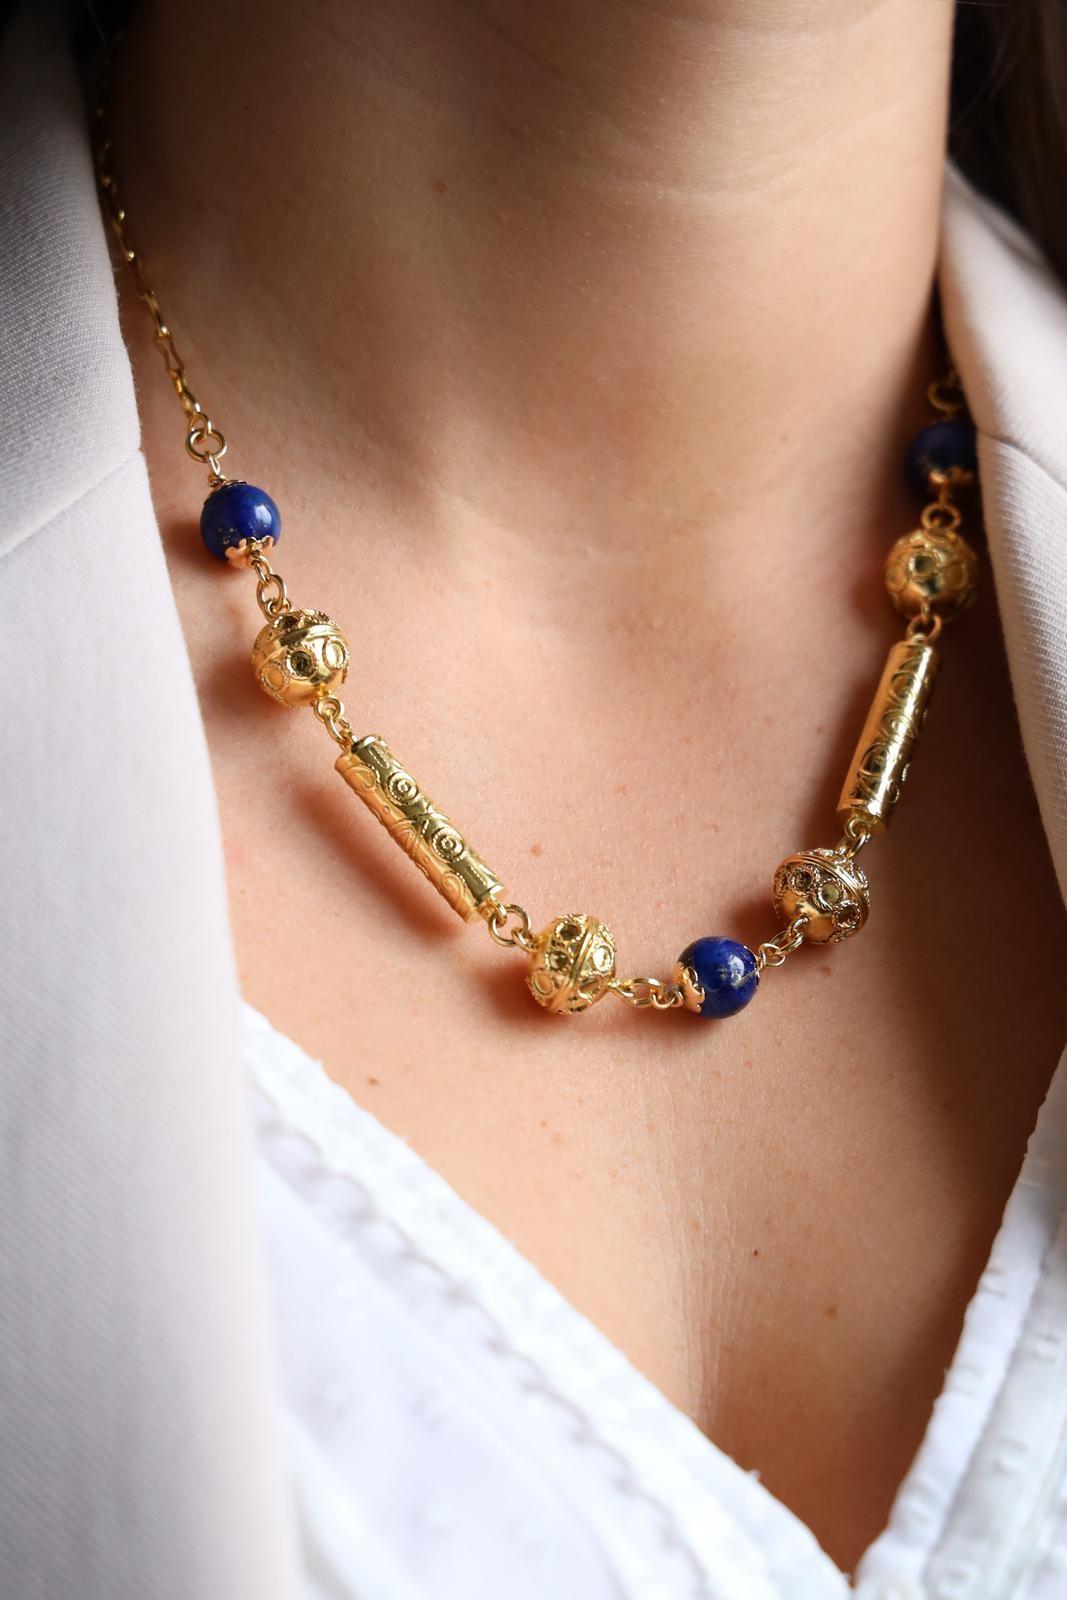 Necklace in yellow 820 thousandths (22 carats). flexible articulated mesh. 3 pearls of lapis lazuli of approximately 1.01 cm of diameter. 4 balls in yellow gold of approximately 1.25 cm of diameter. 2 cylinders in yellow gold of approximately 2.55